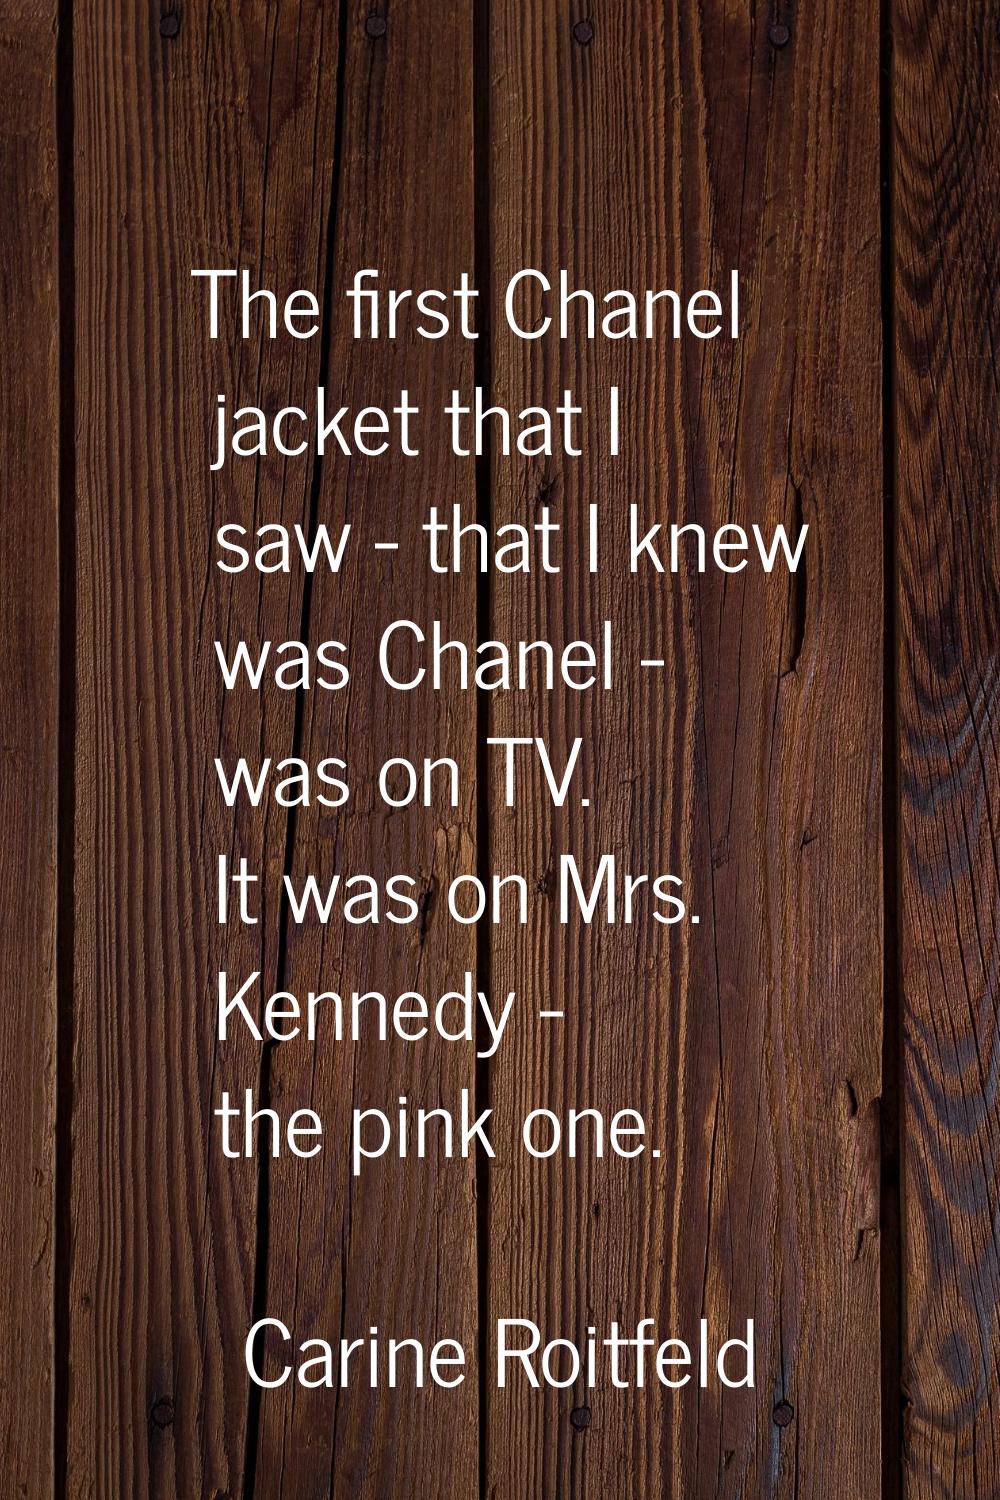 The first Chanel jacket that I saw - that I knew was Chanel - was on TV. It was on Mrs. Kennedy - t